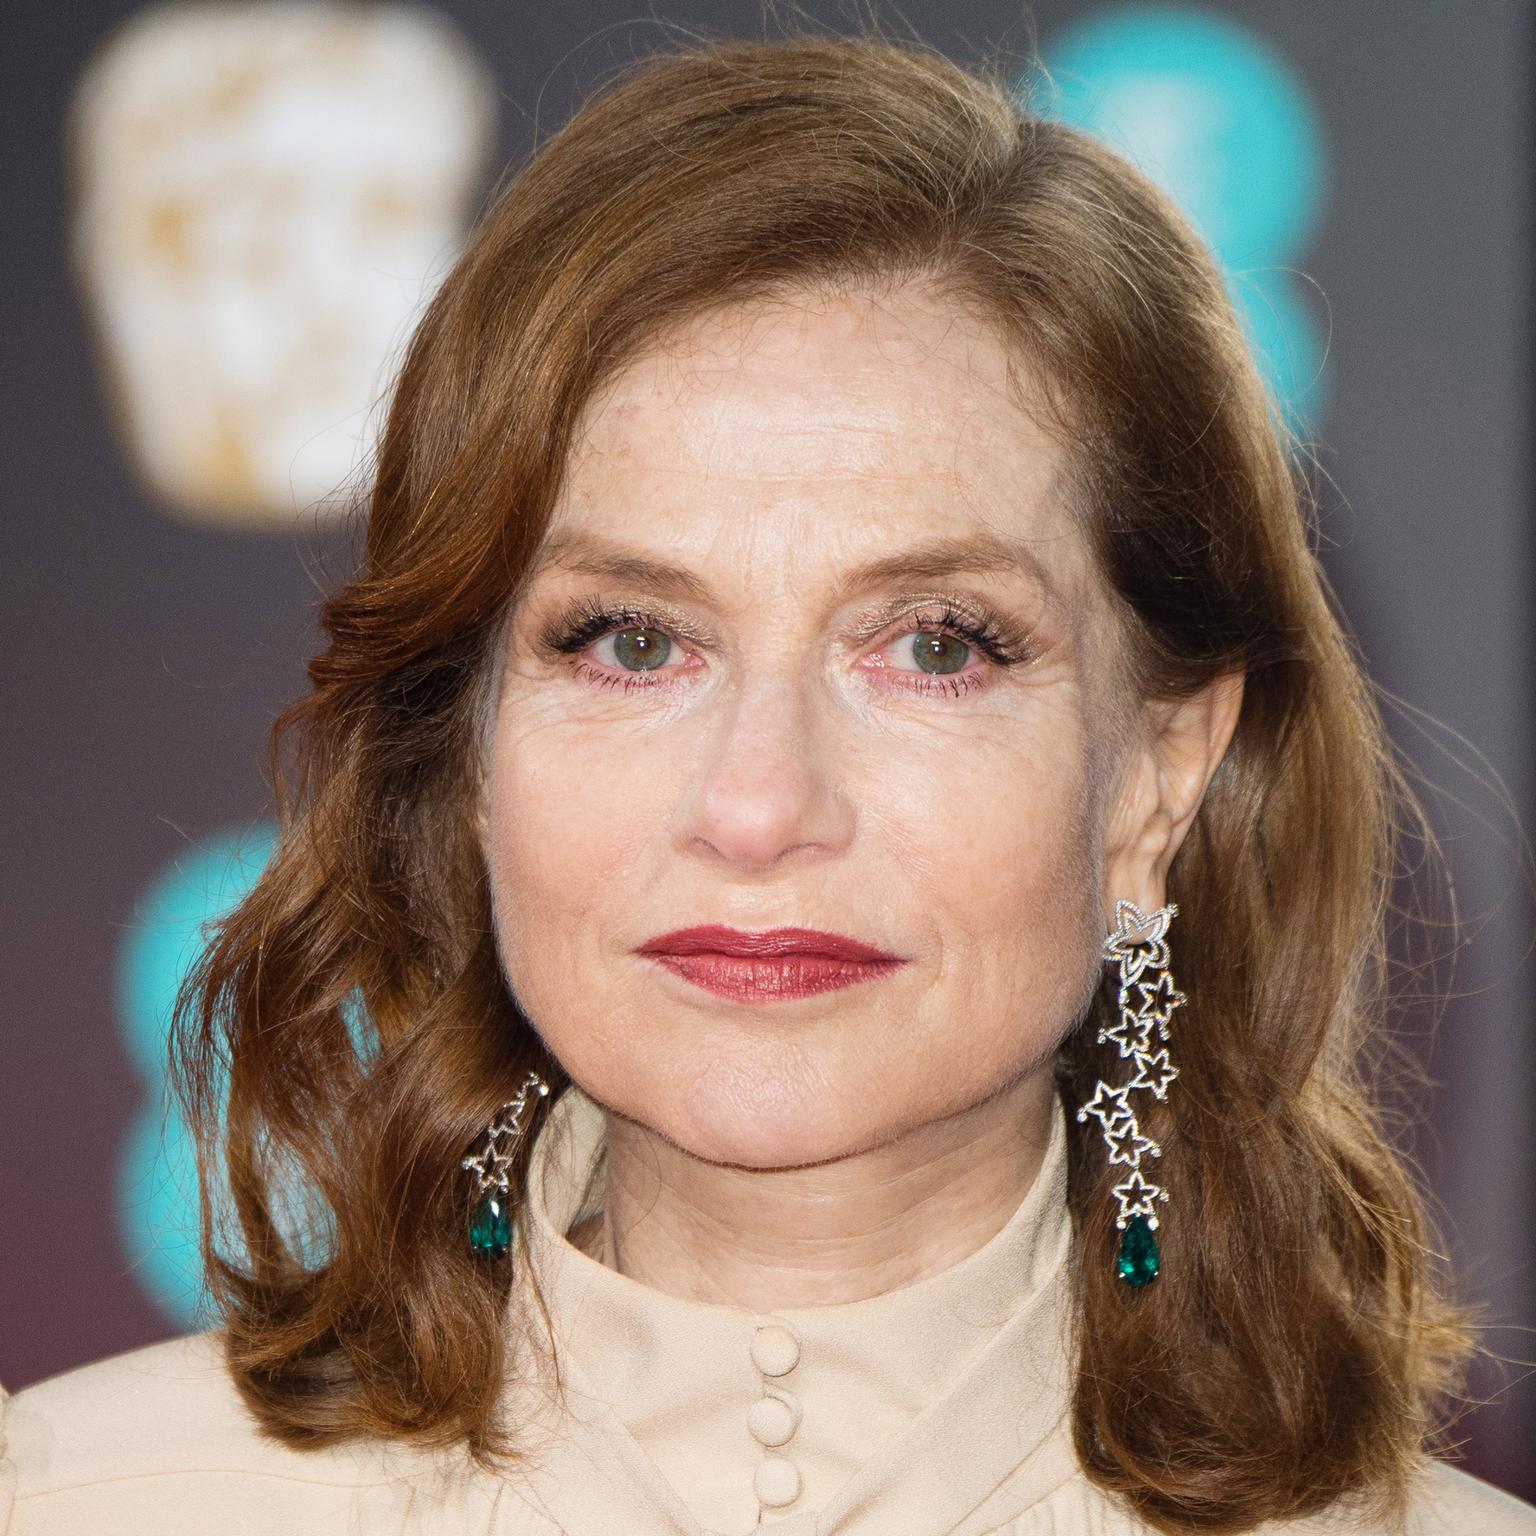 Isabelle Huppert wearing Chopard to the 2017 BAFTAs